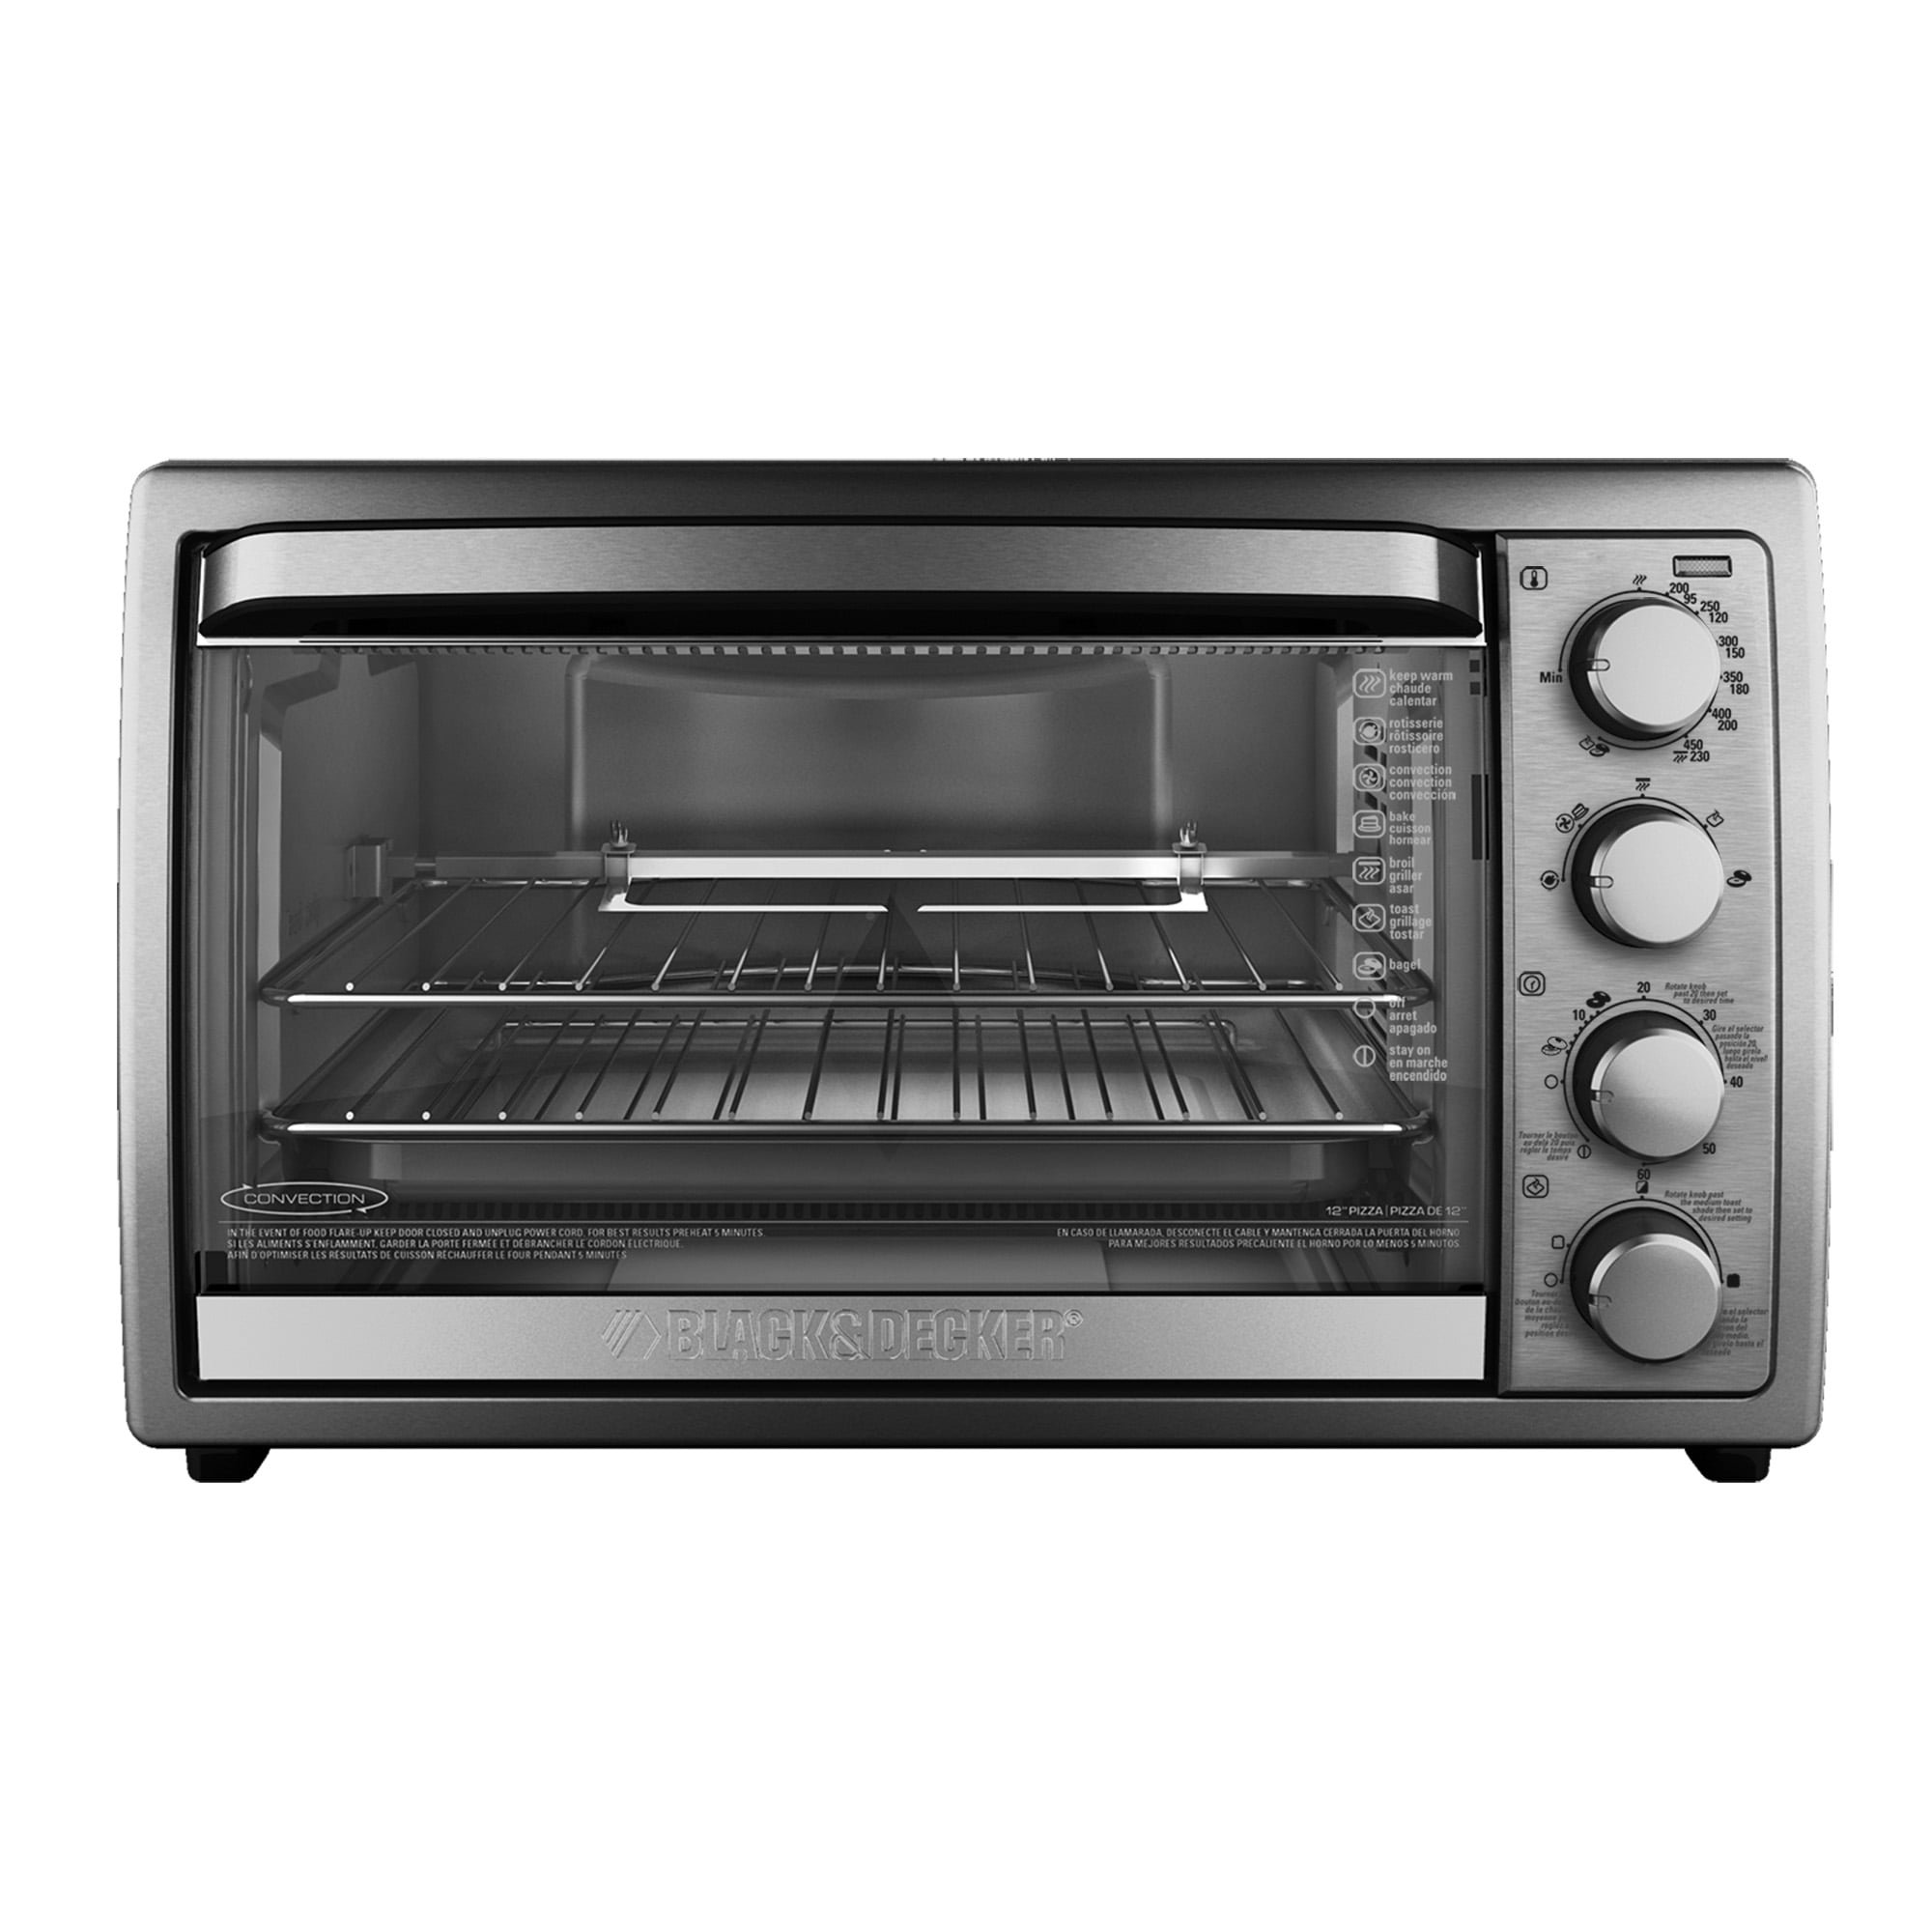 BLACK+DECKER Toast-R-Oven. TRO700S Broil/Convection Stainless